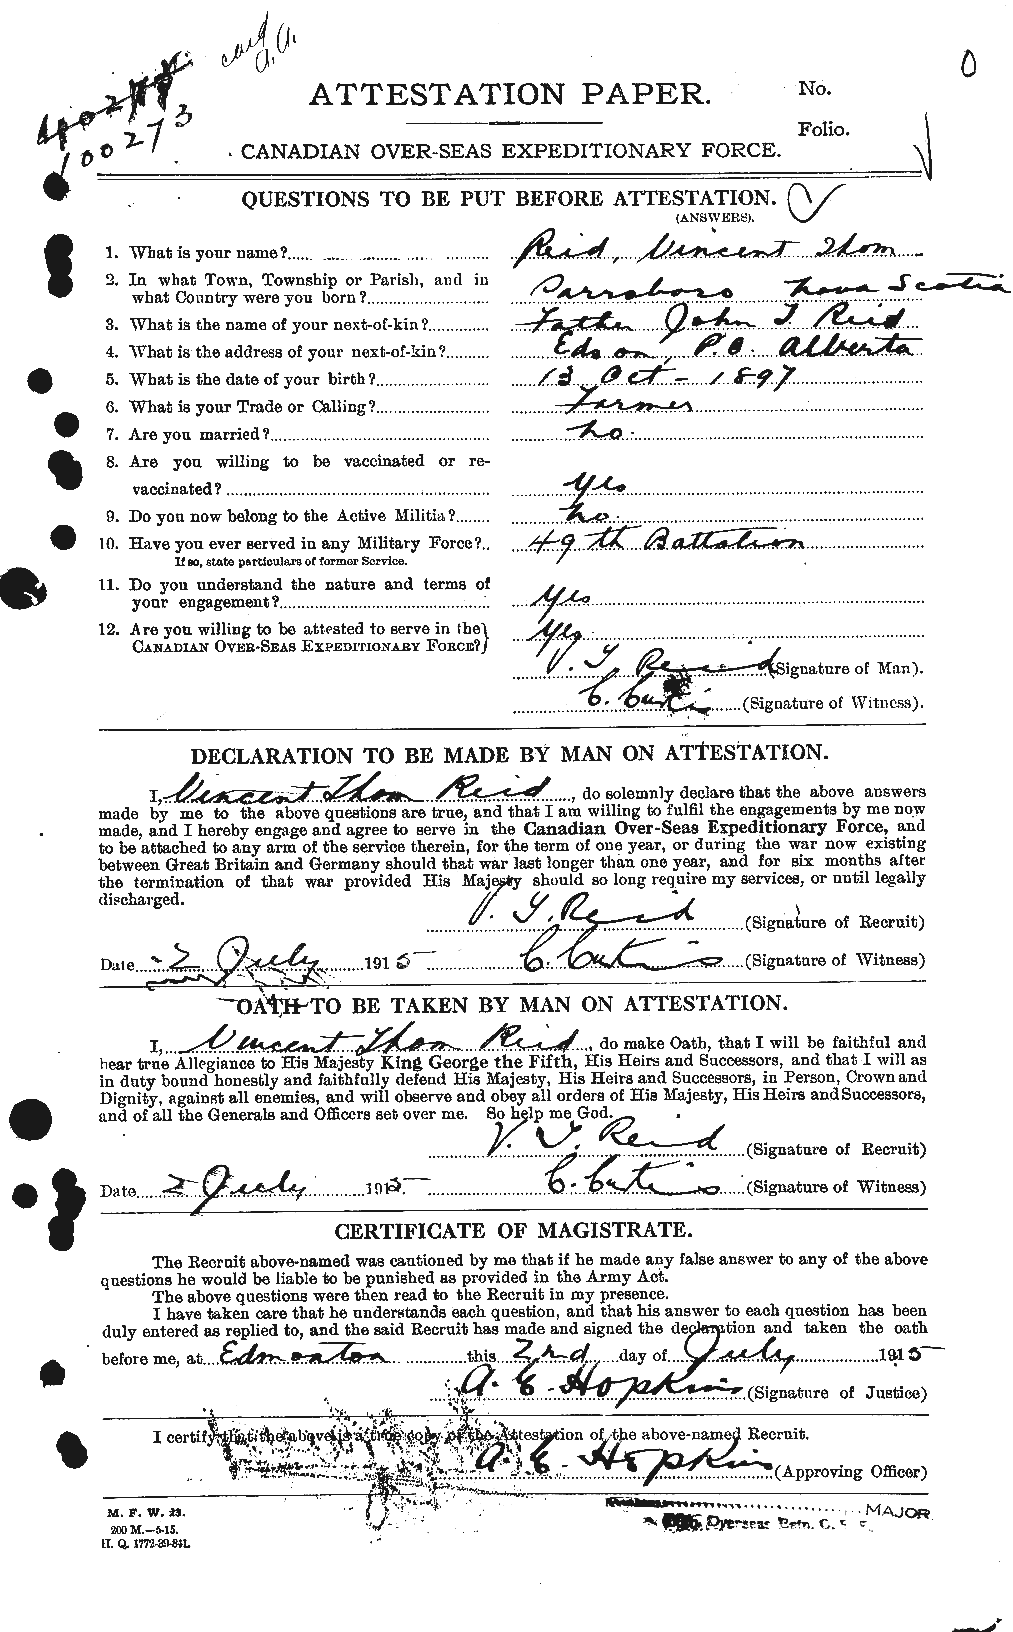 Personnel Records of the First World War - CEF 602013a